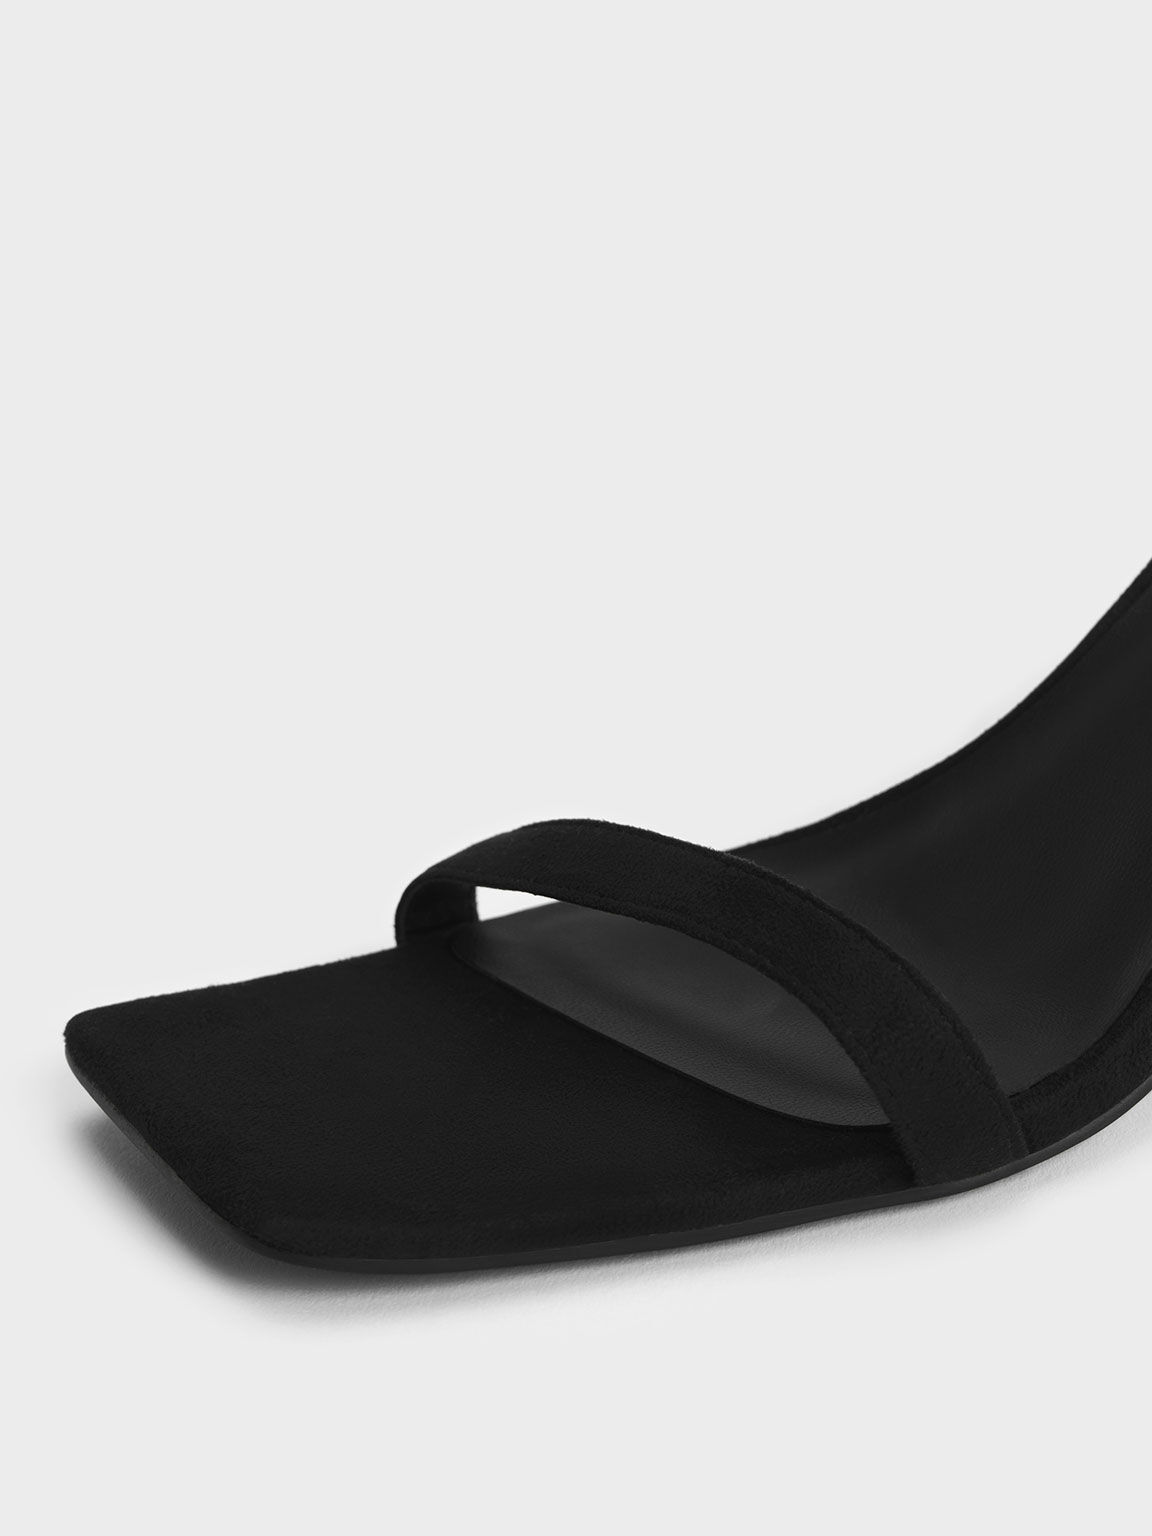 Black Textured Ankle-Strap Heeled Sandals - CHARLES & KEITH KH